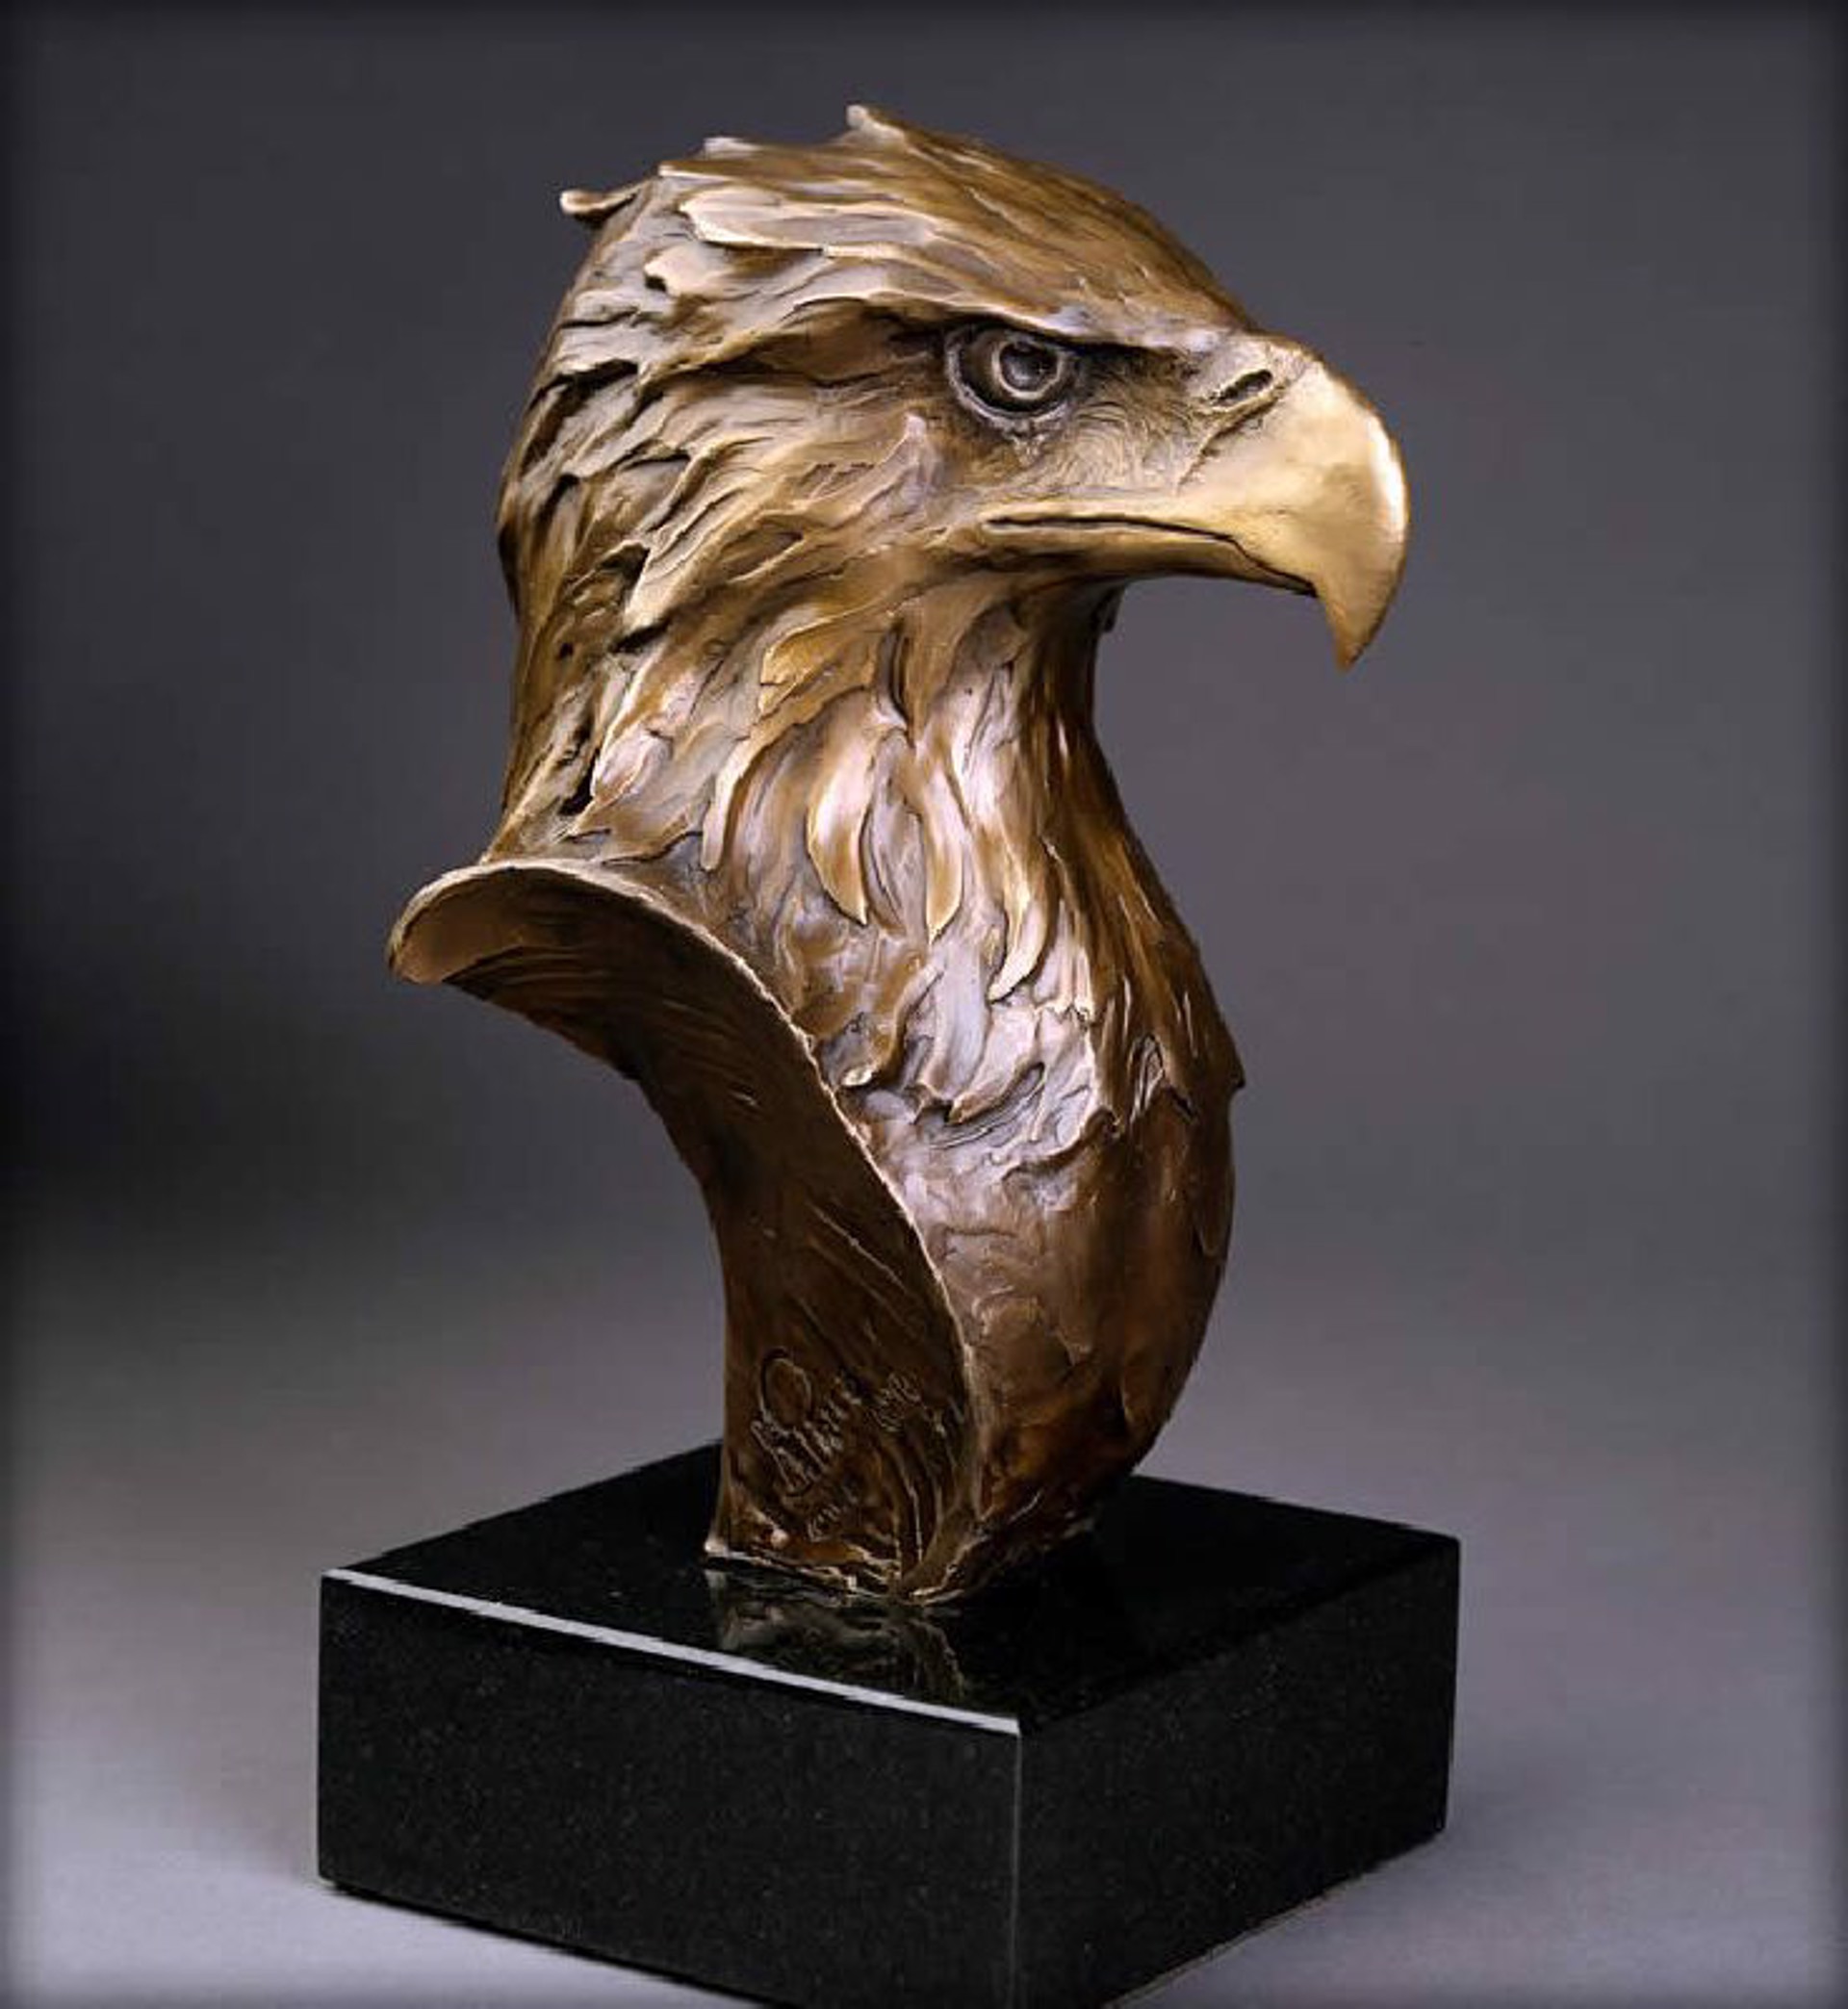 The Sentinel by Gary Lee Price (sculptor)